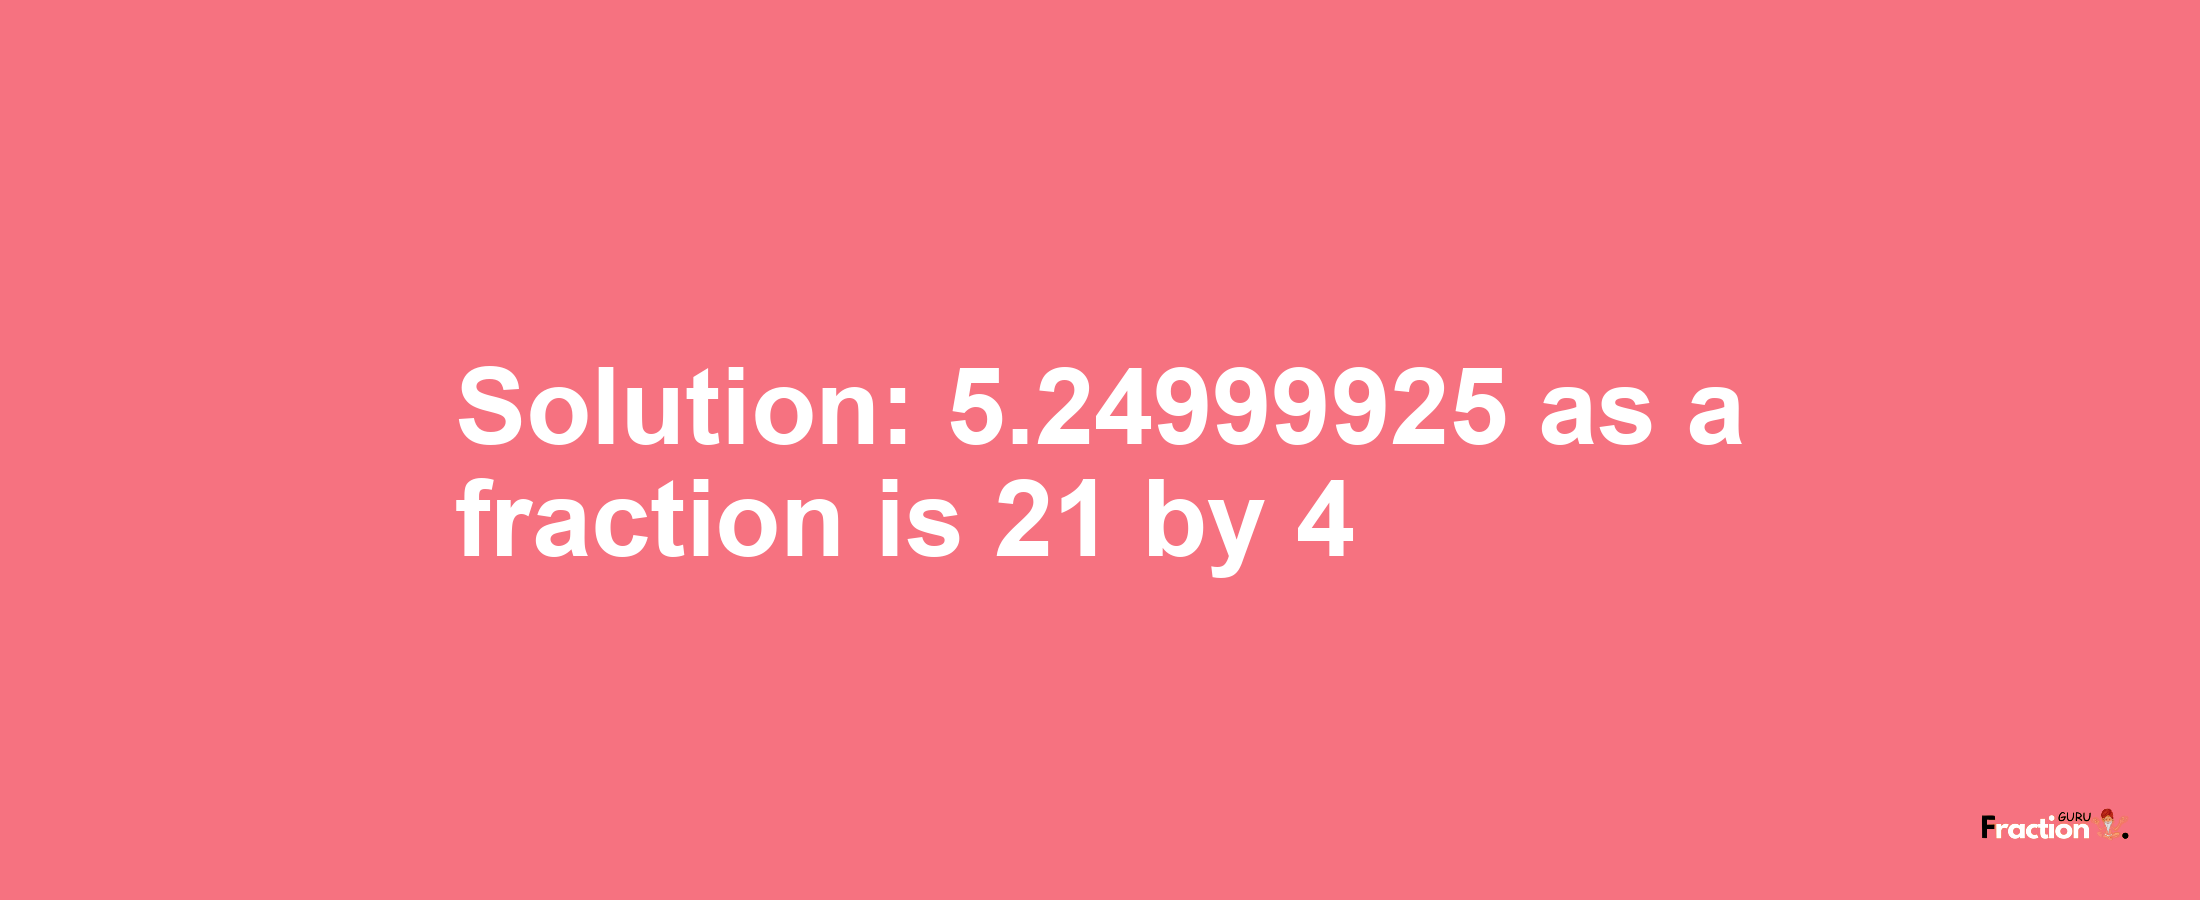 Solution:5.24999925 as a fraction is 21/4